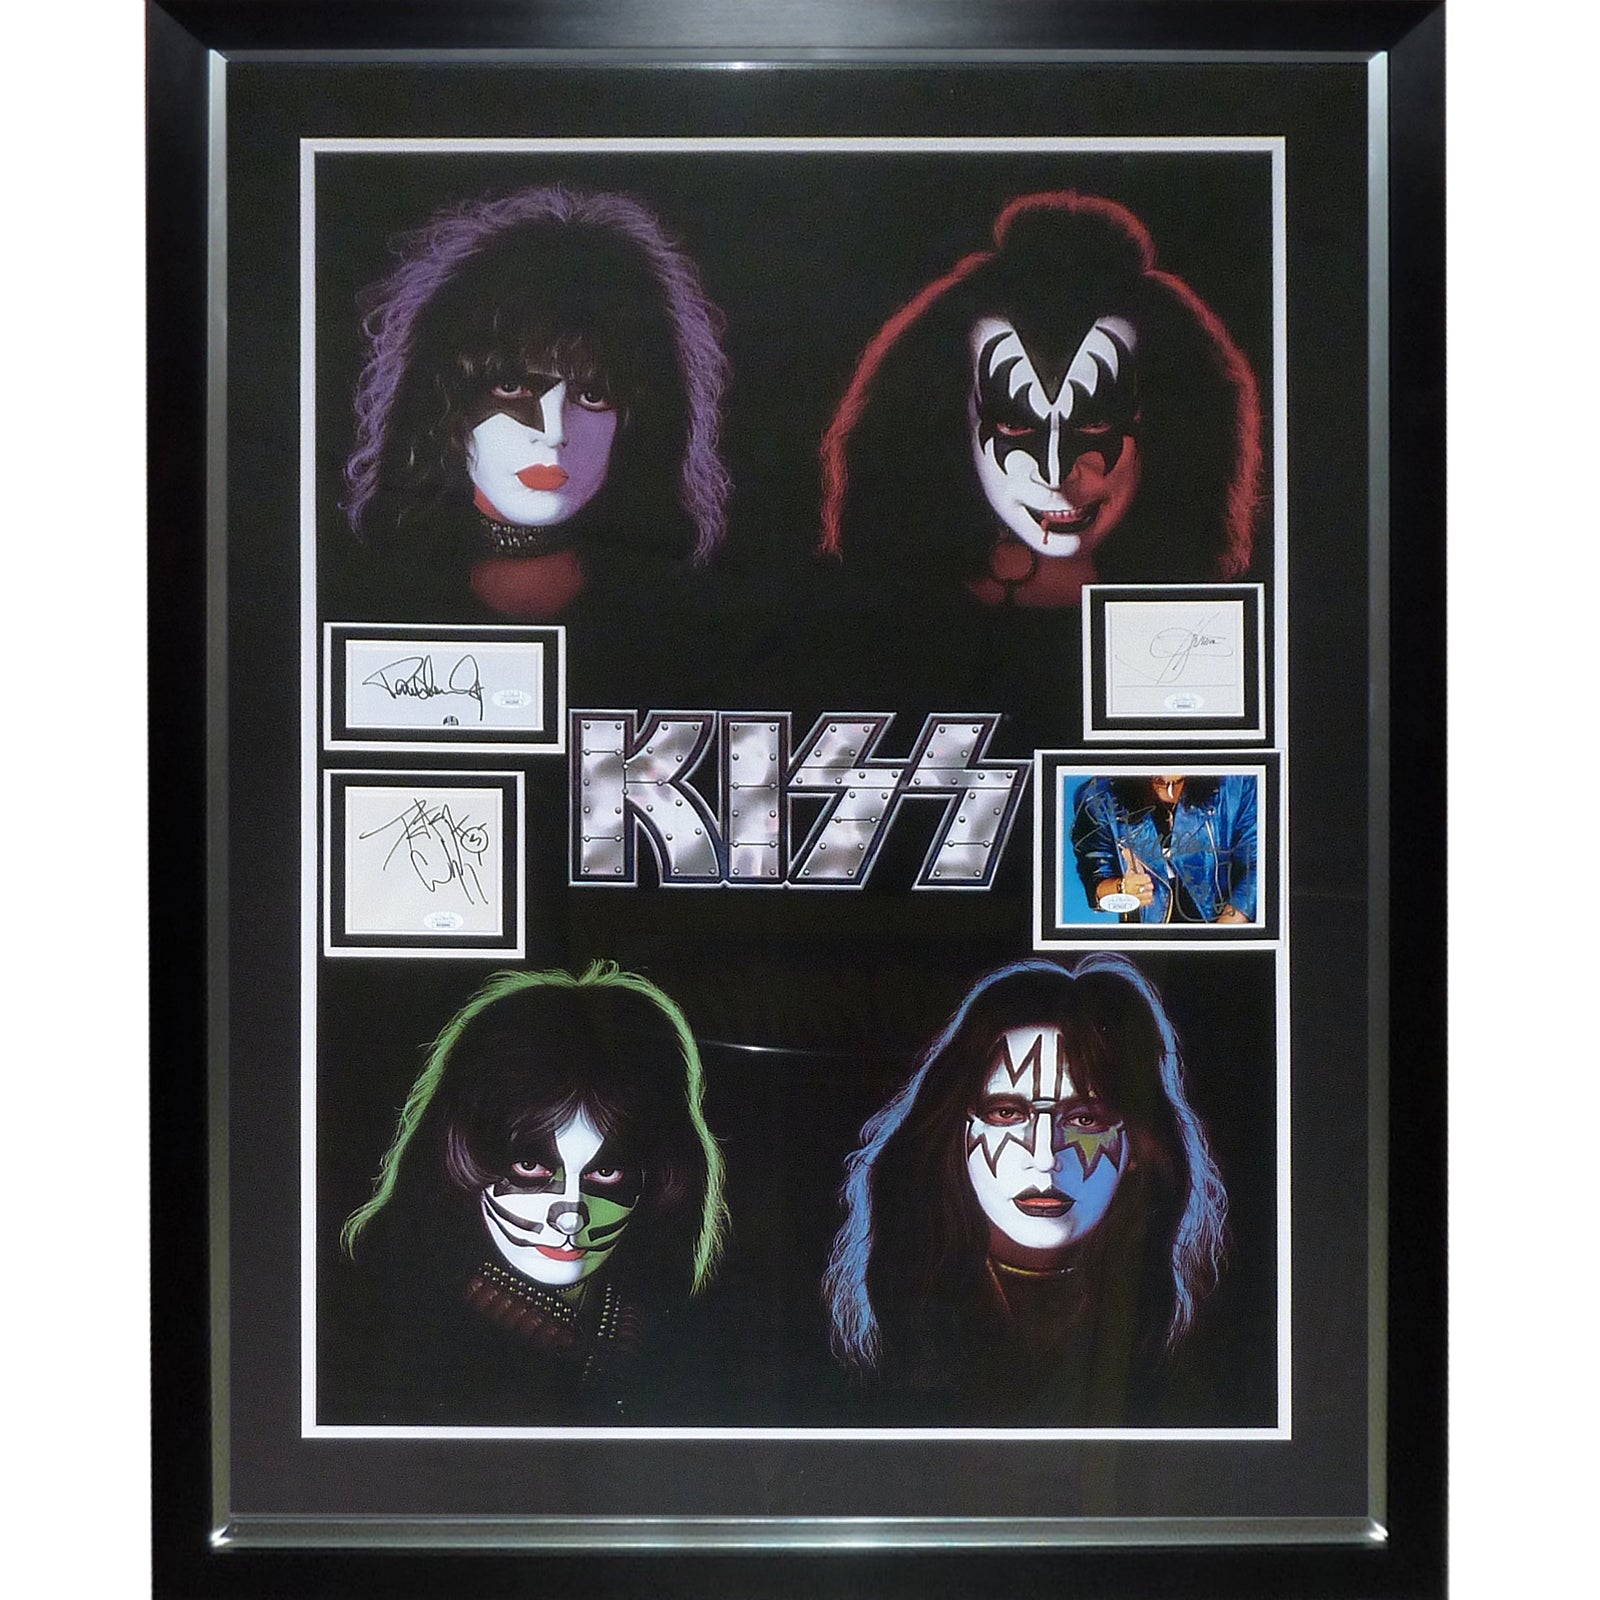 KISS Full-Size Music Poster Deluxe Framed with all 4 Band Member Autographs - JSA